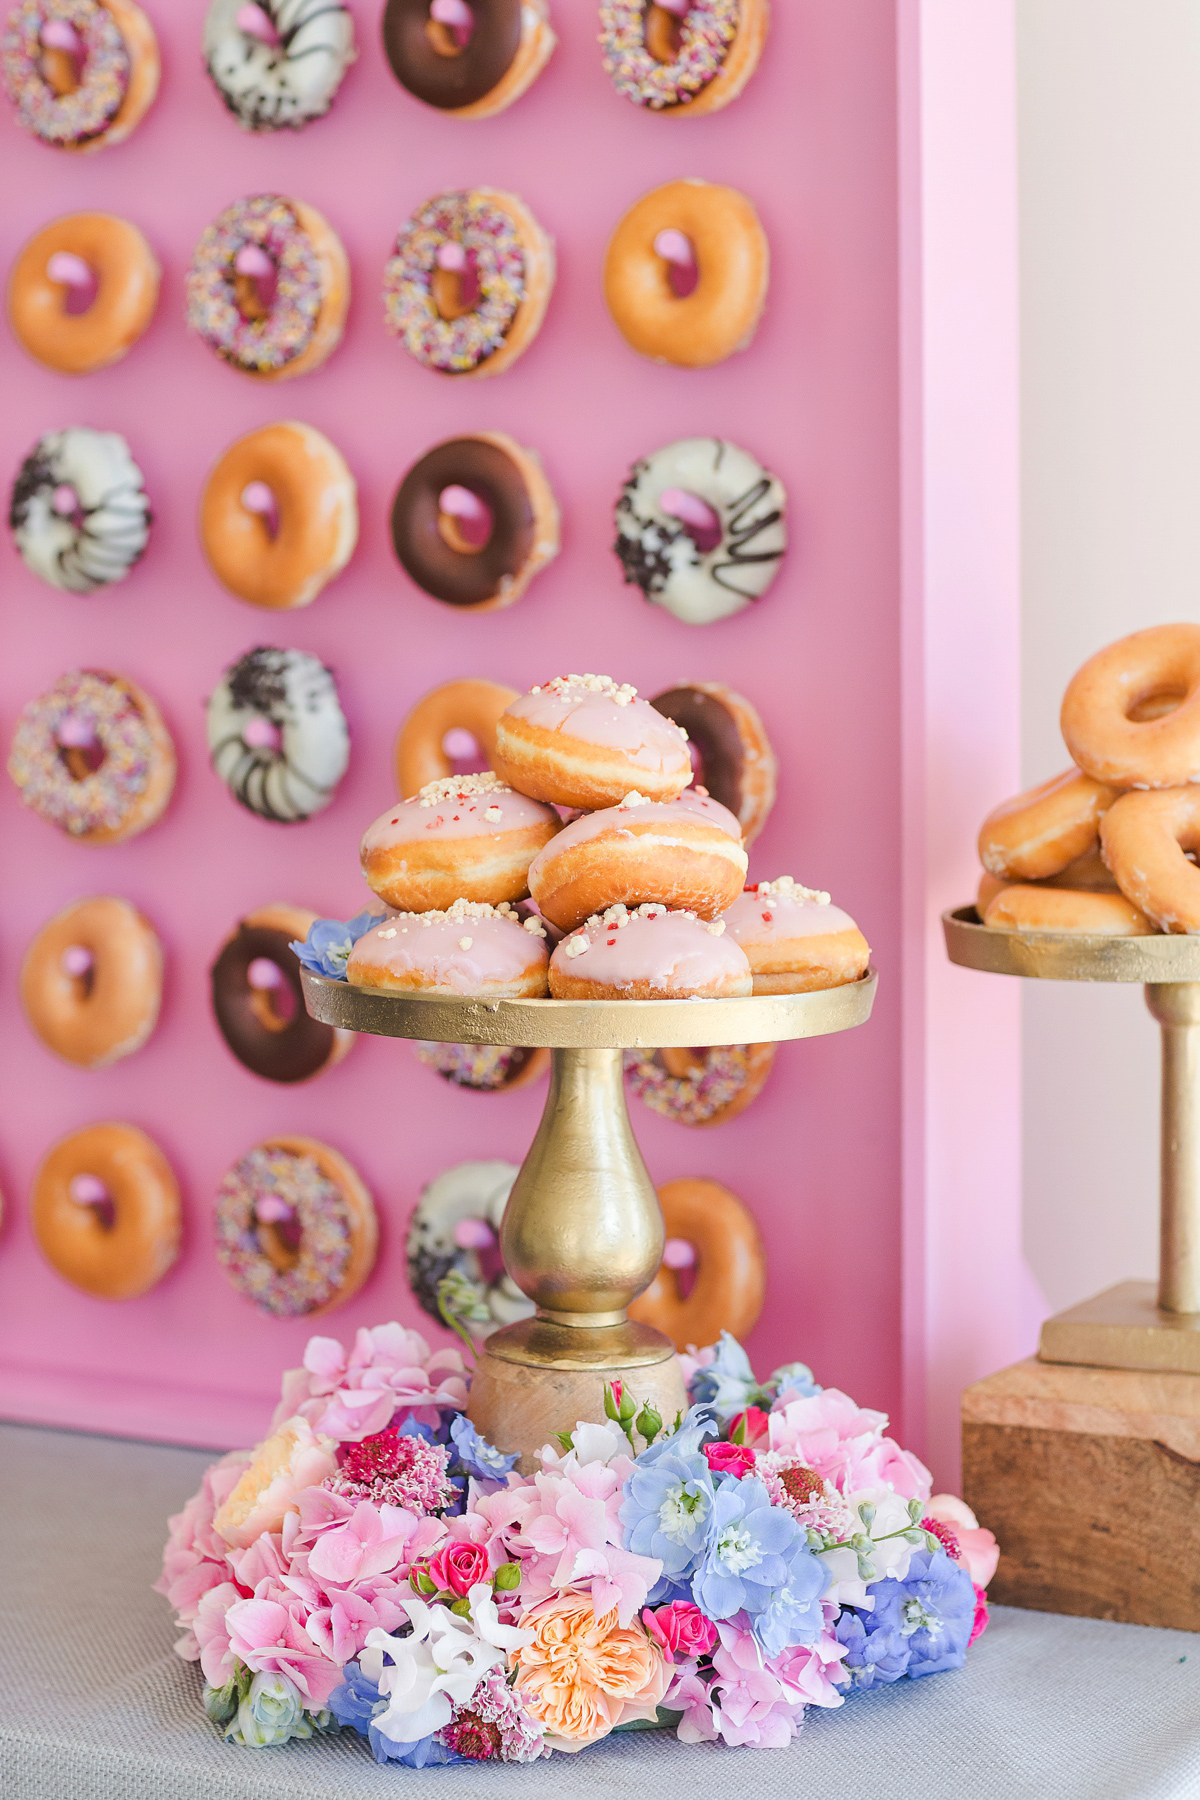 Donut walls and Liquid Nitrogen Ice cream bars! Kalm Kitchen are a brilliant catering company that we recommend through our littlebookforbrides.com. Here they demonstrate some of their creative catering ideas.